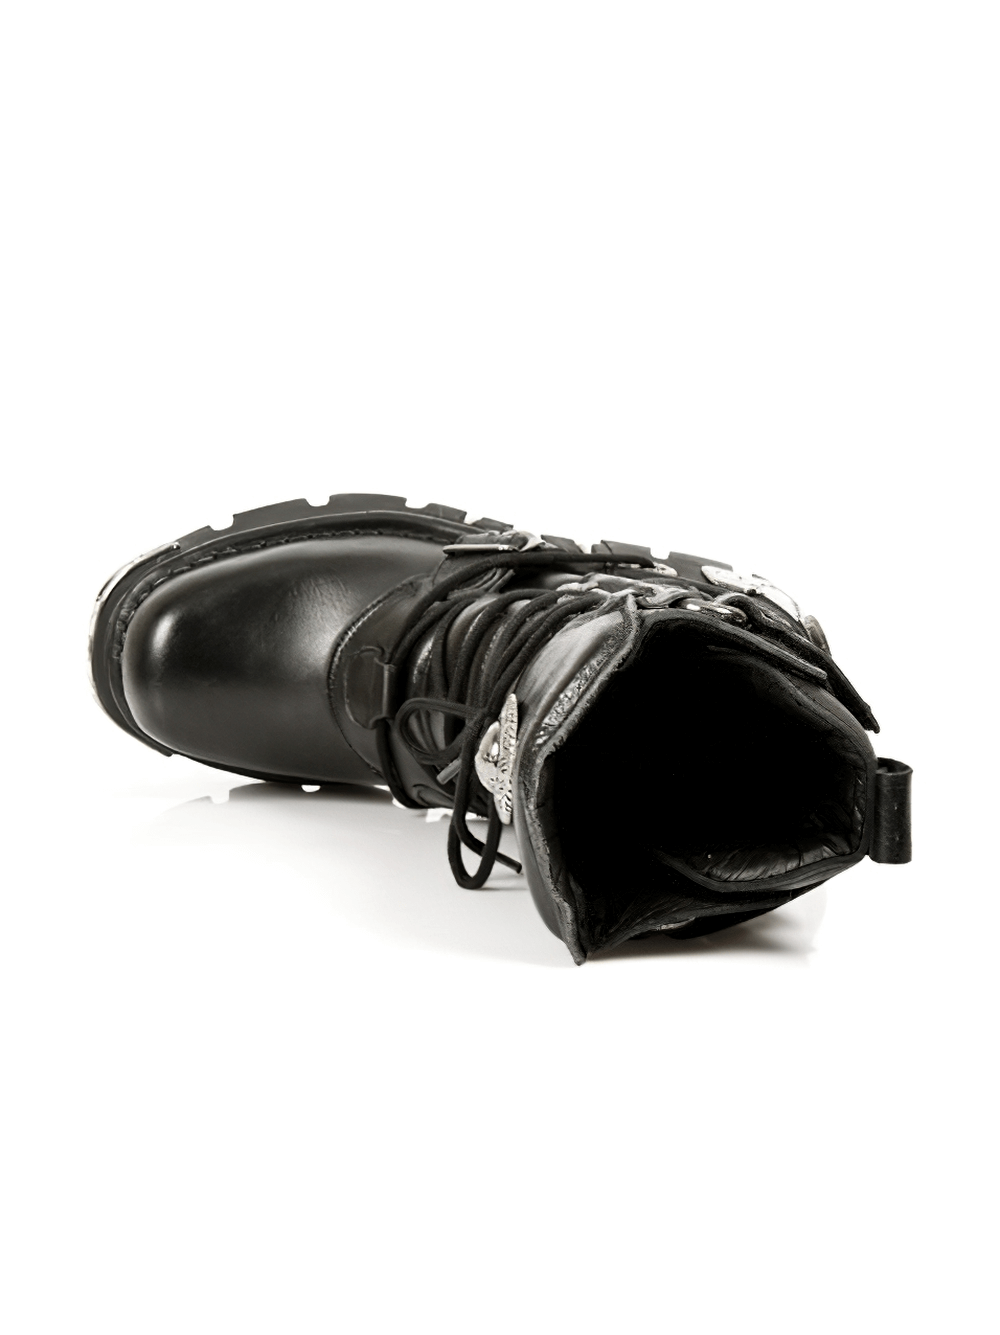 NEW ROCK Gothic Black Leather Boots with Metal Accents